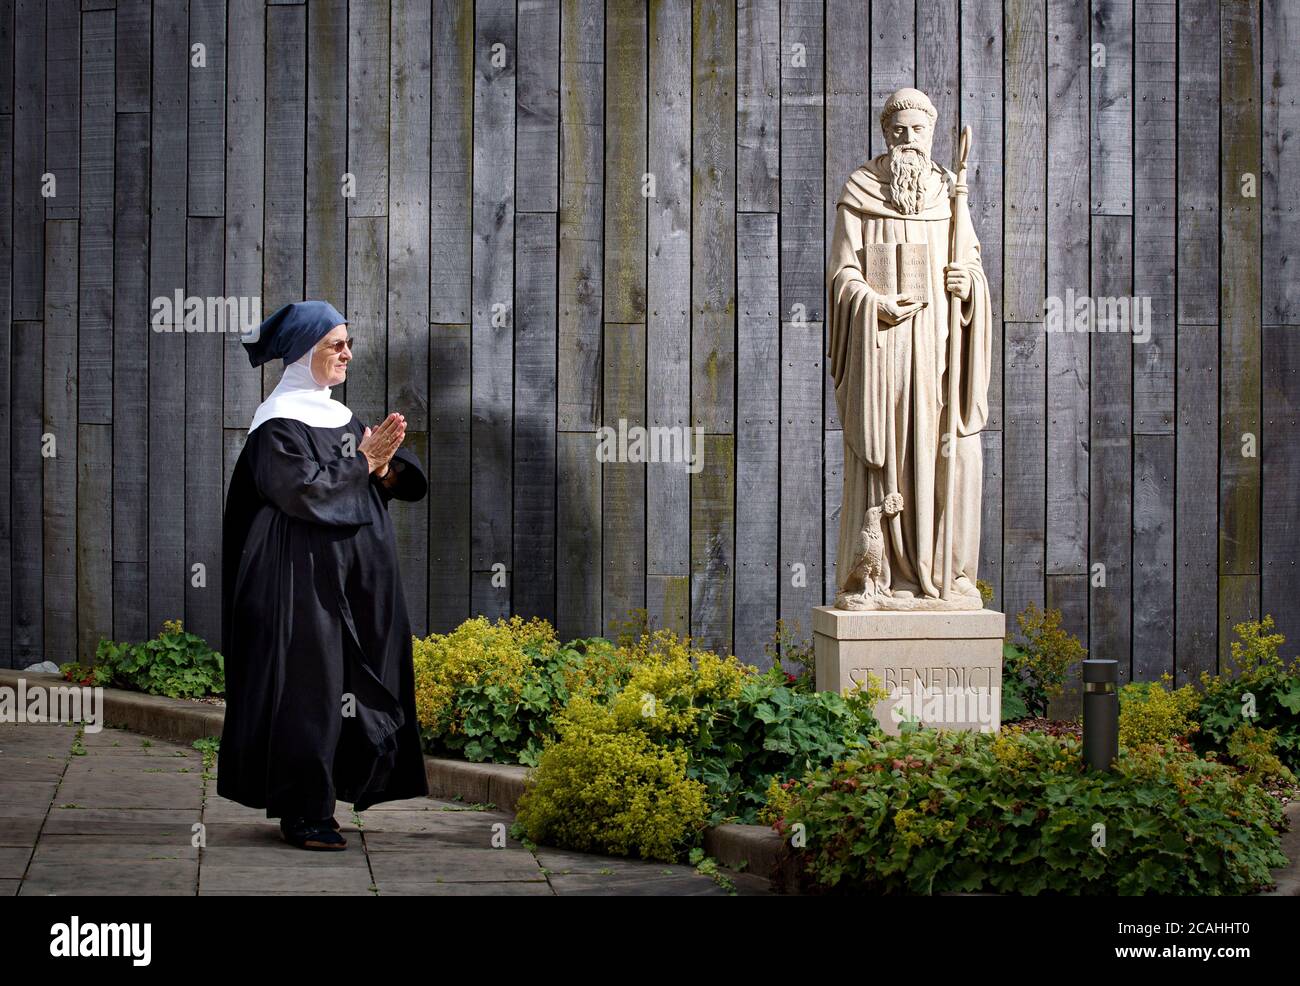 Sister Agnes walks past a newly installed statue of St Benedict at Stanbrook Abbey nunnery in Wass, North Yorkshire. The statue, made by Matthias Garn Master Mason and Partner from a single piece of West Yorkshire fine-grained sandstone, is a replica of an existing statue which became badly weathered due to the harsh climate at Stanbrook Abbey. Stock Photo